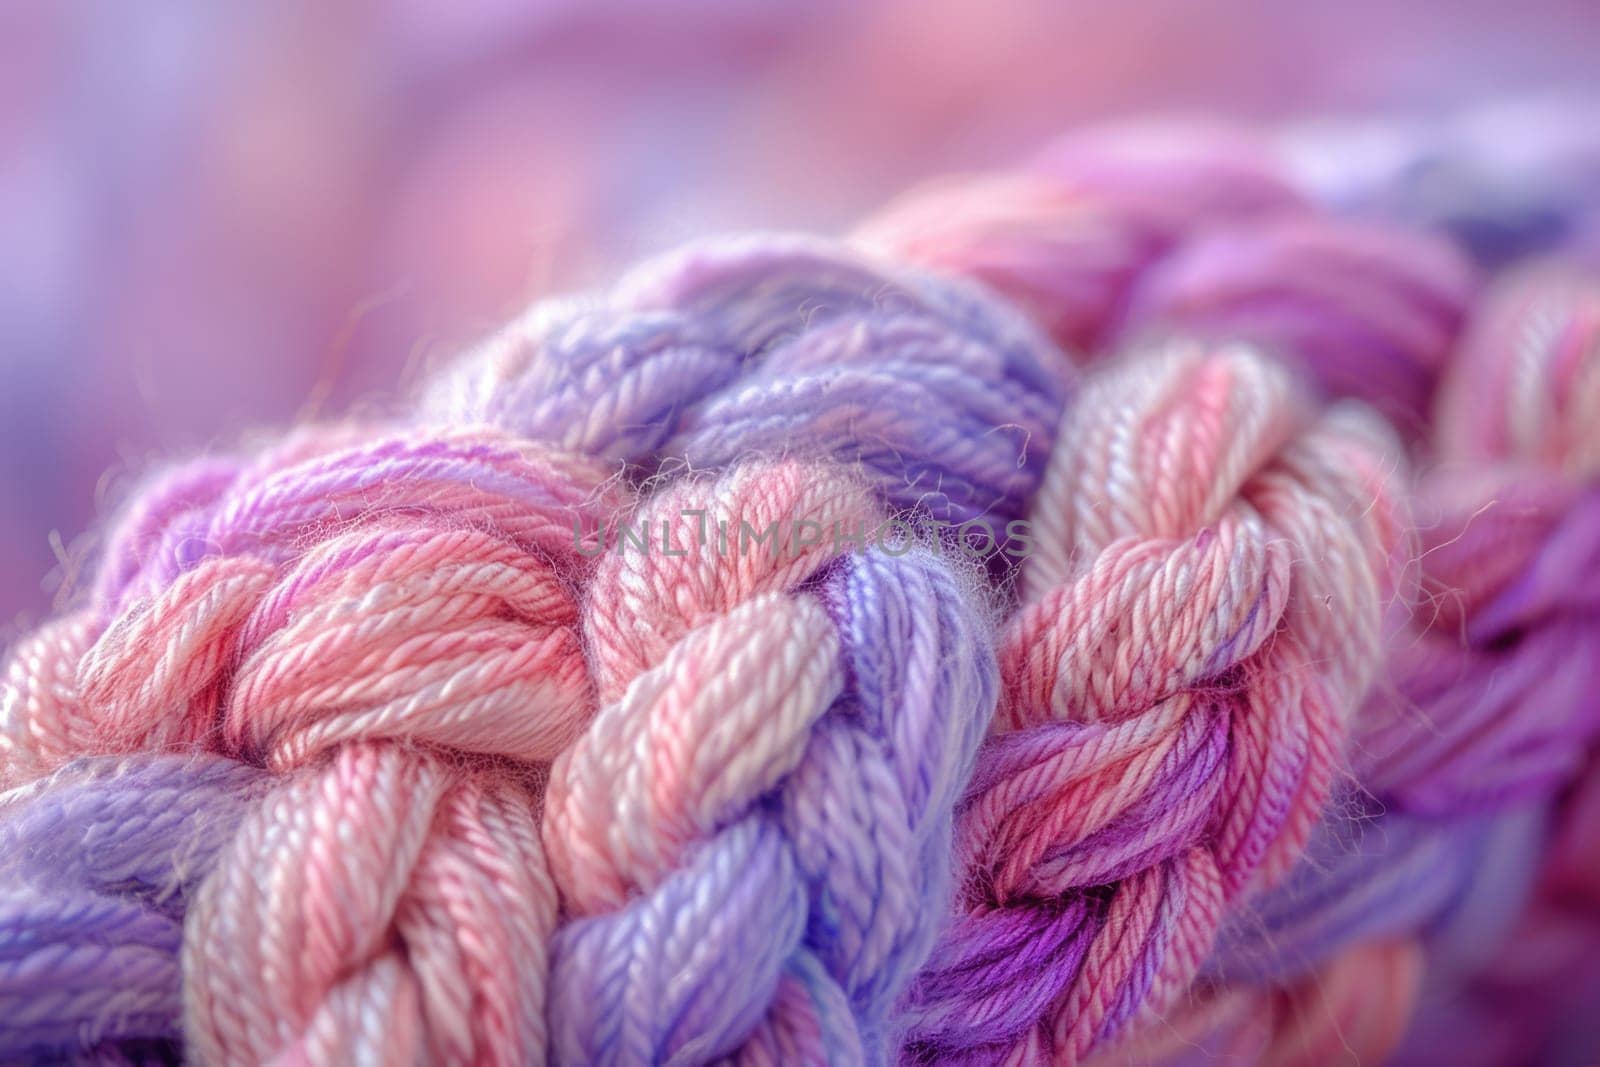 A close-up view of a multicolored skein of yarn, showcasing the vibrant colors and intricate patterns of the fibers.